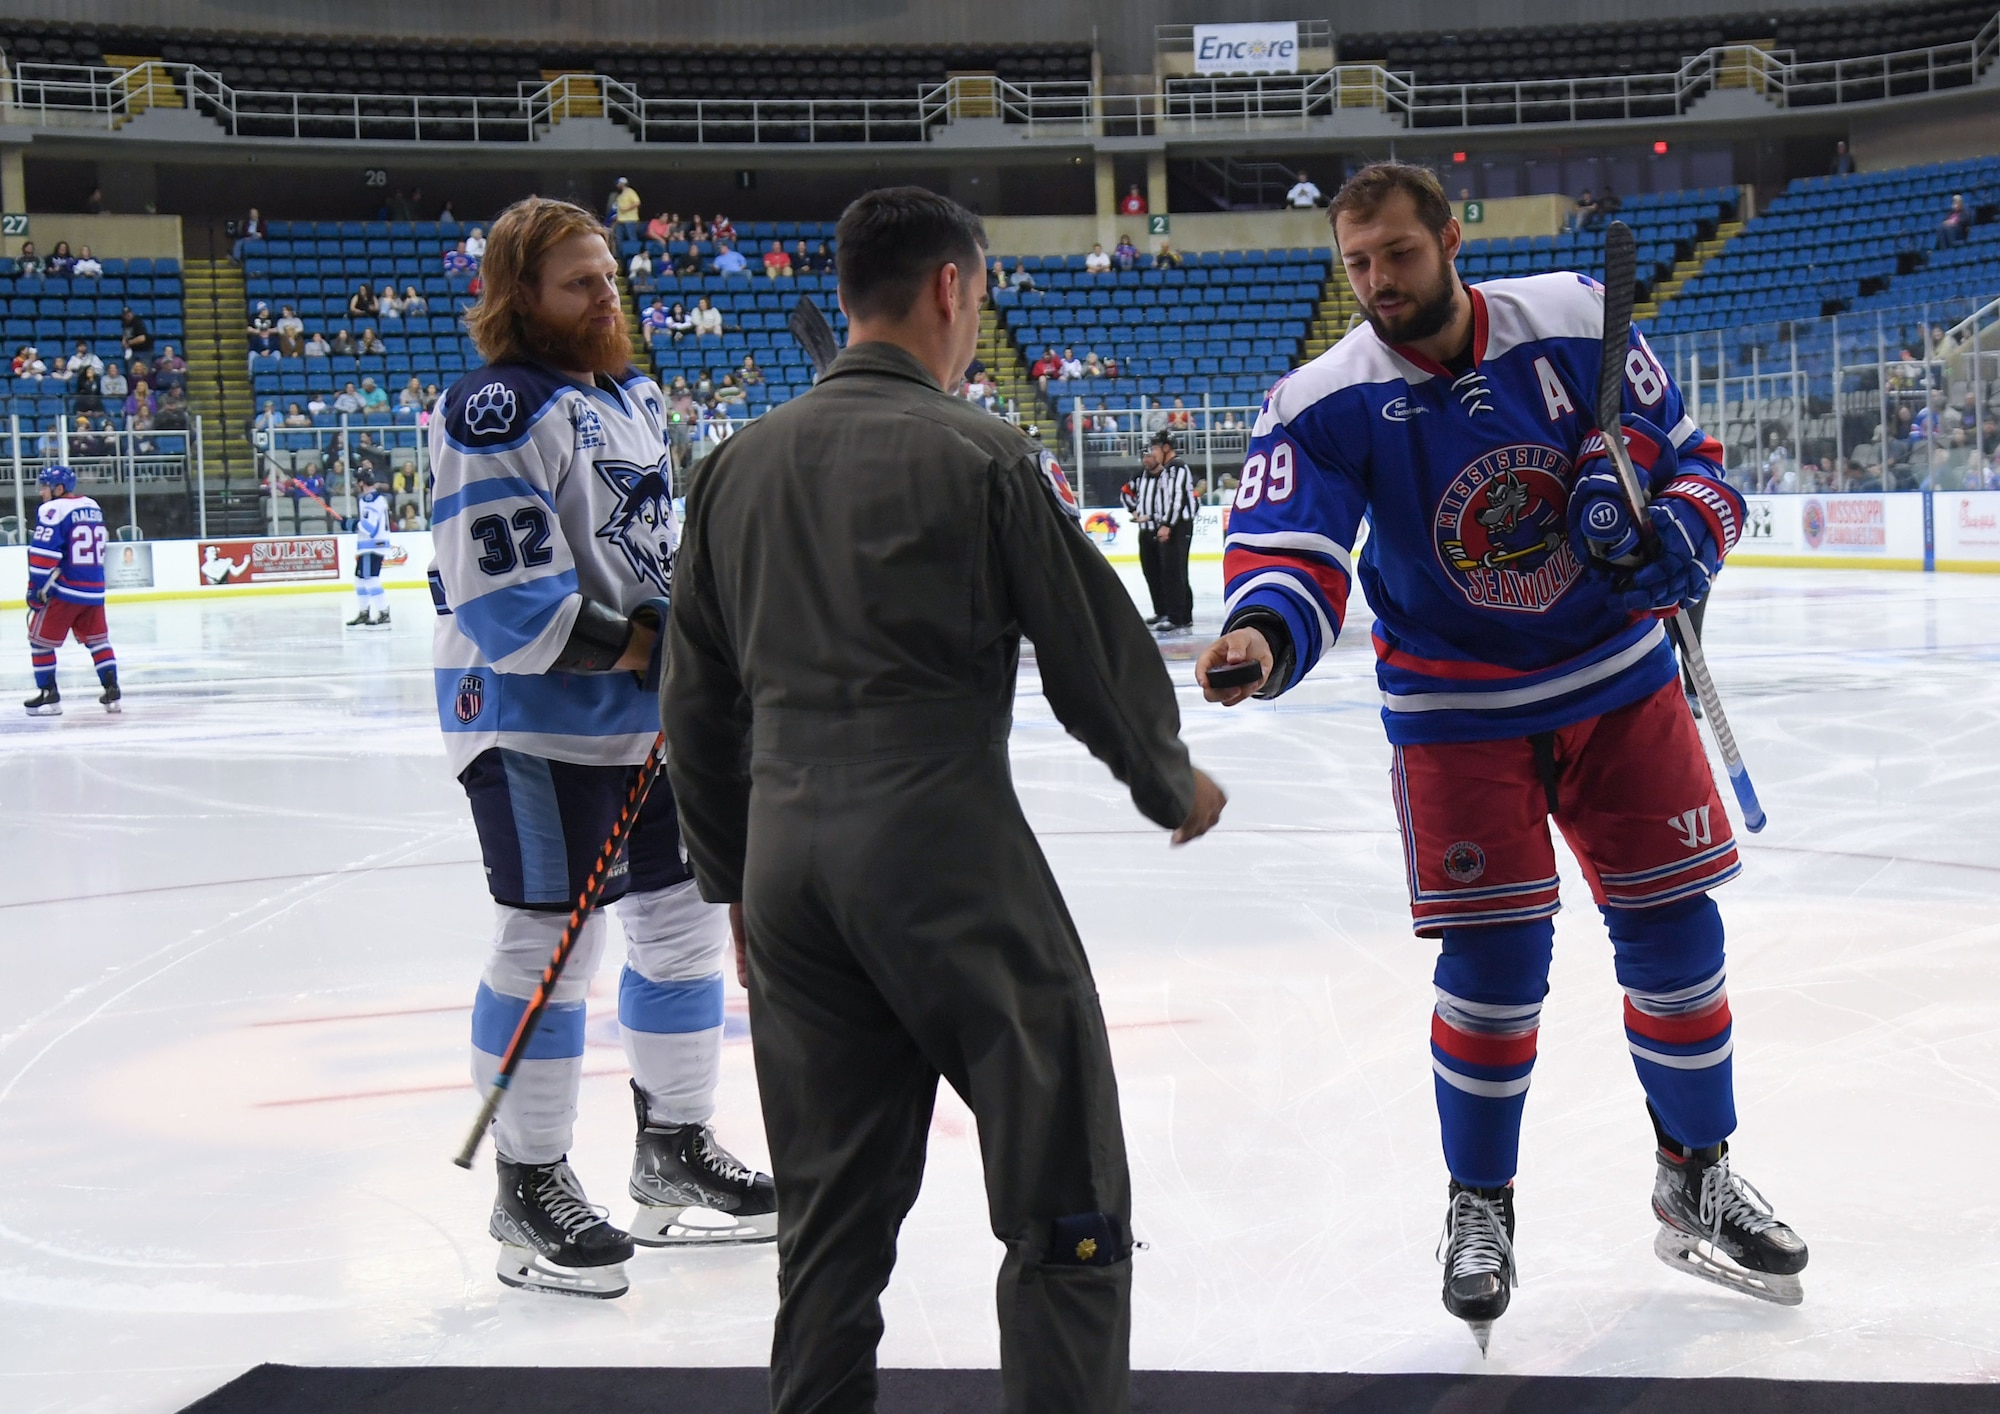 U.S. Air Force Maj. Alex Boykin, 53rd Weather Reconnaissance Squadron pilot, participates in a ceremonial puck drop during the Biloxi Pro Hockey game inside the Mississippi Coast Coliseum at Biloxi, Mississippi, March 3, 2023.